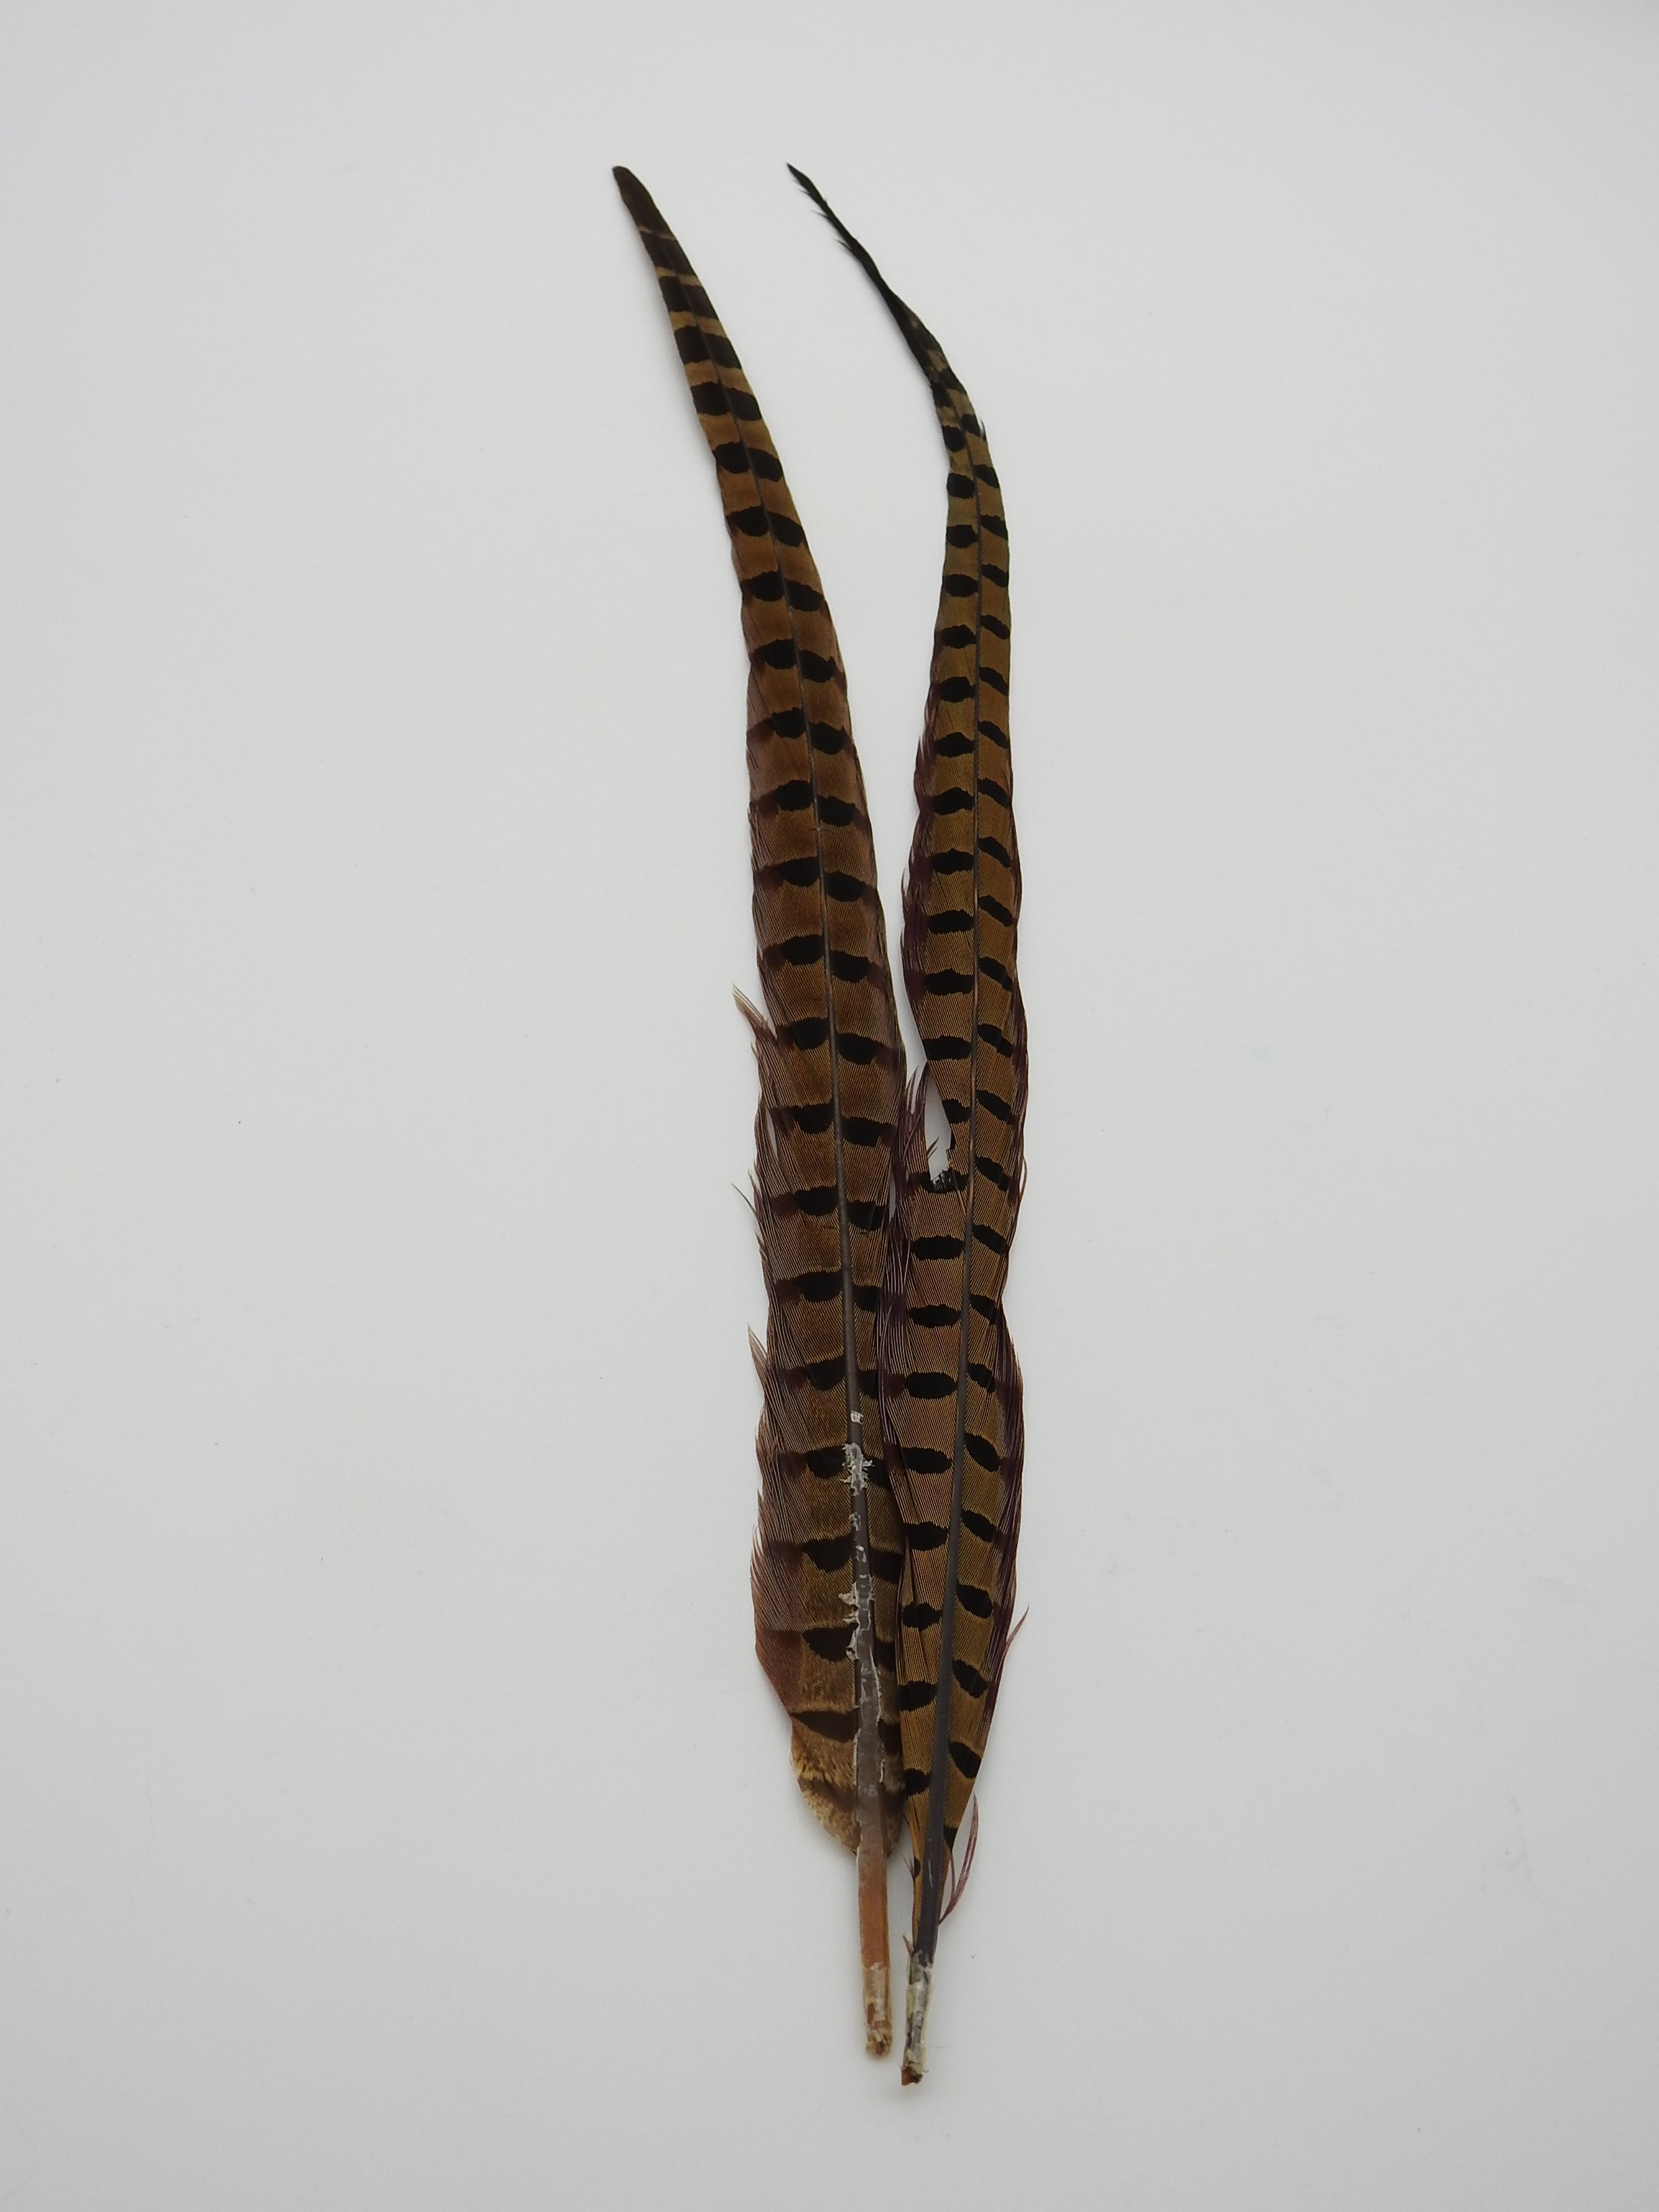 Ringneck Pheasant Tail Feathers - The Wandering Bull, LLC